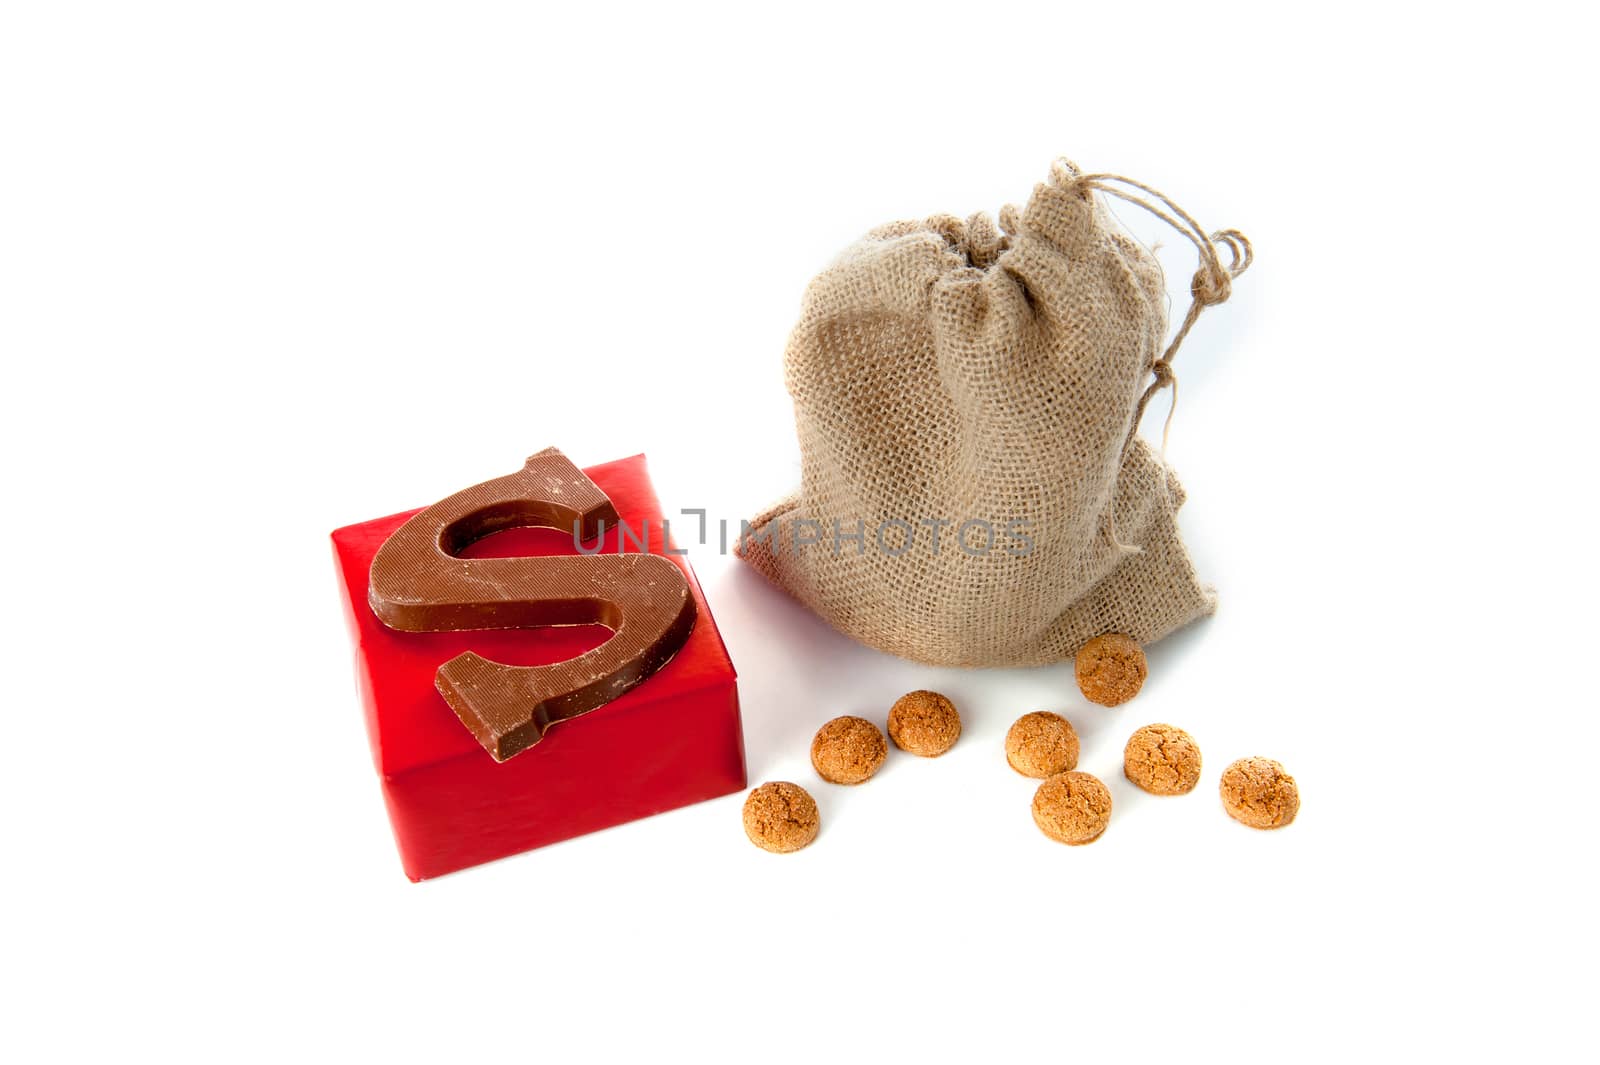 A jute bag full of pepernoten, a present and a chocolate letter, for celebrating a dutch holiday " Sinterklaas "  on the fifth of December